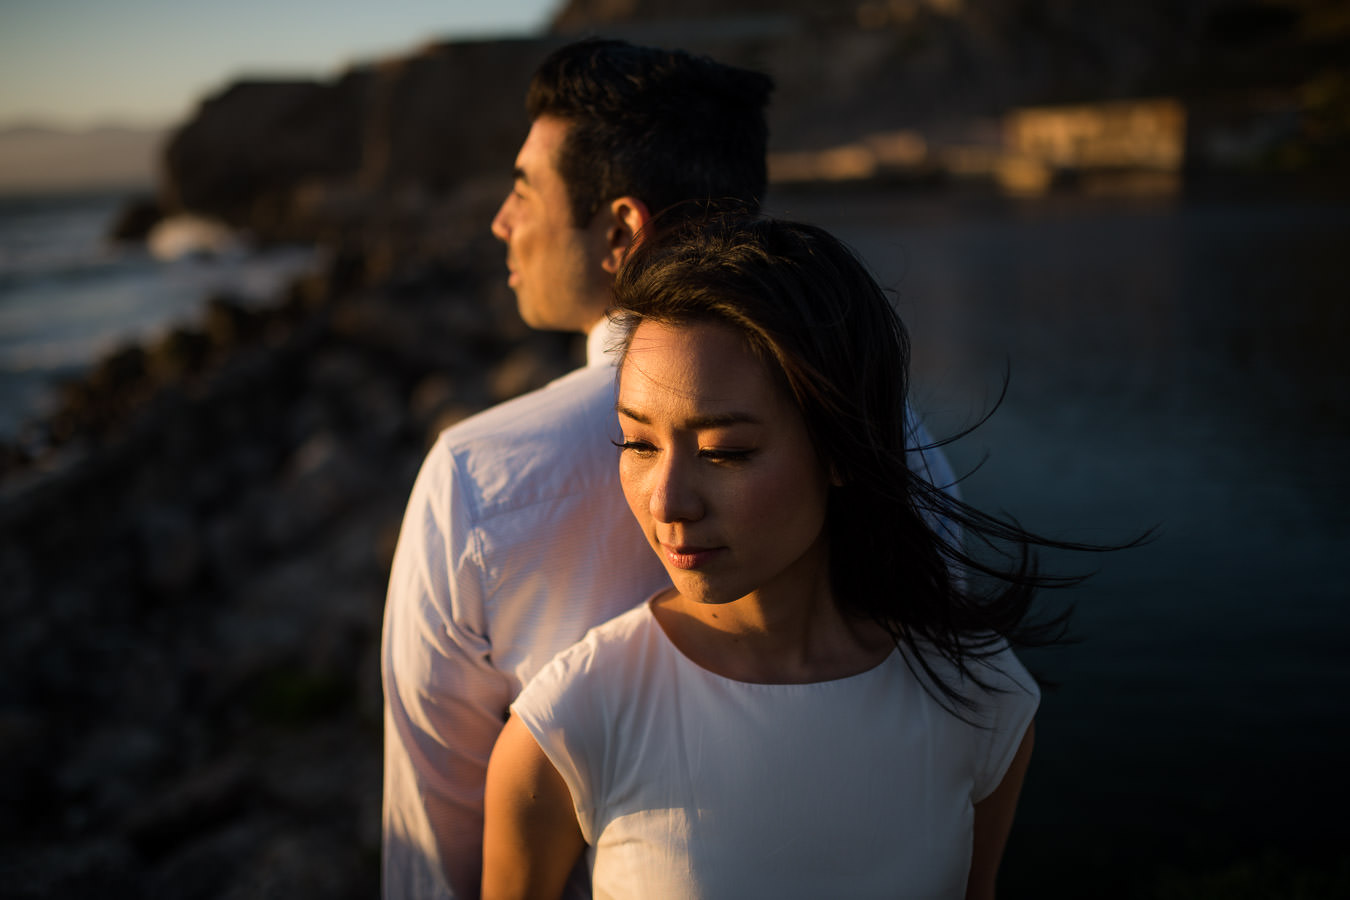 Sutro Baths Engagement Session | Photo by Duy Ho | duyhophotography.com